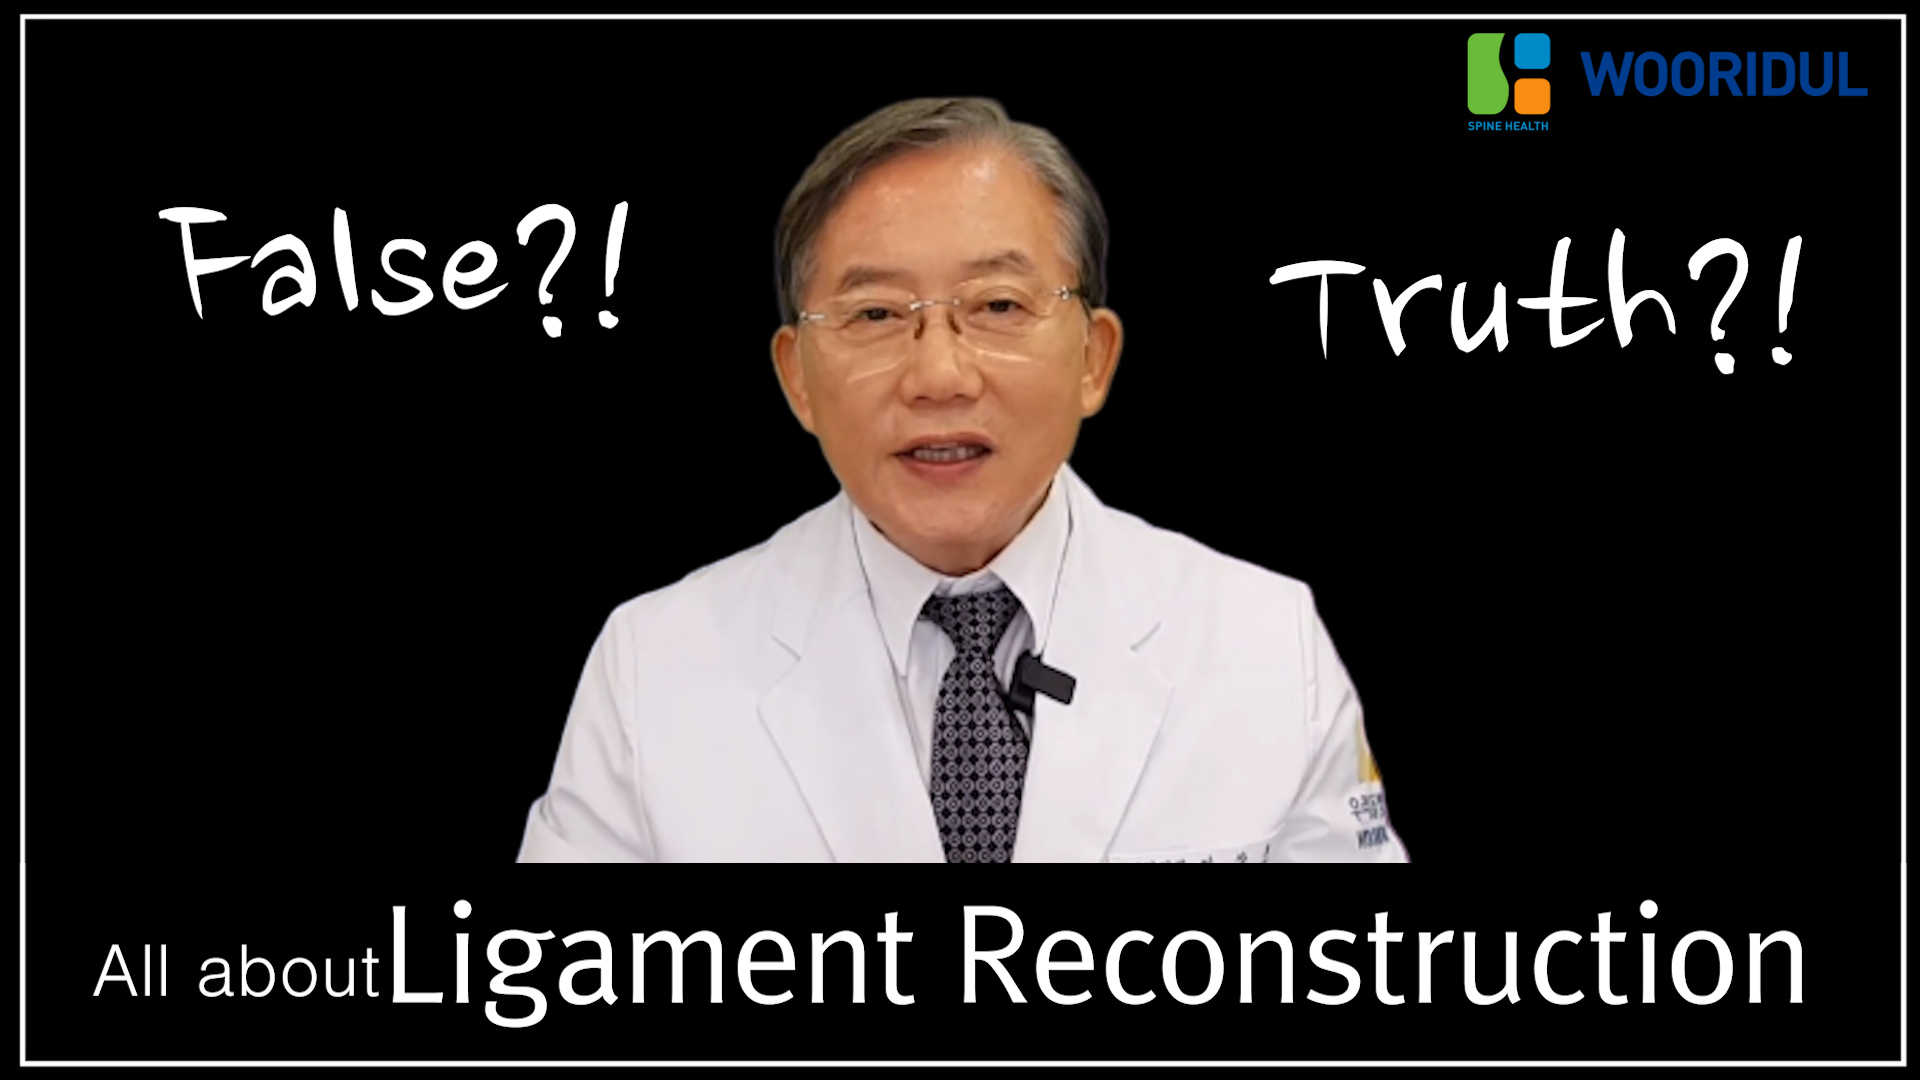 Revealing the truth about ligament reconstruction